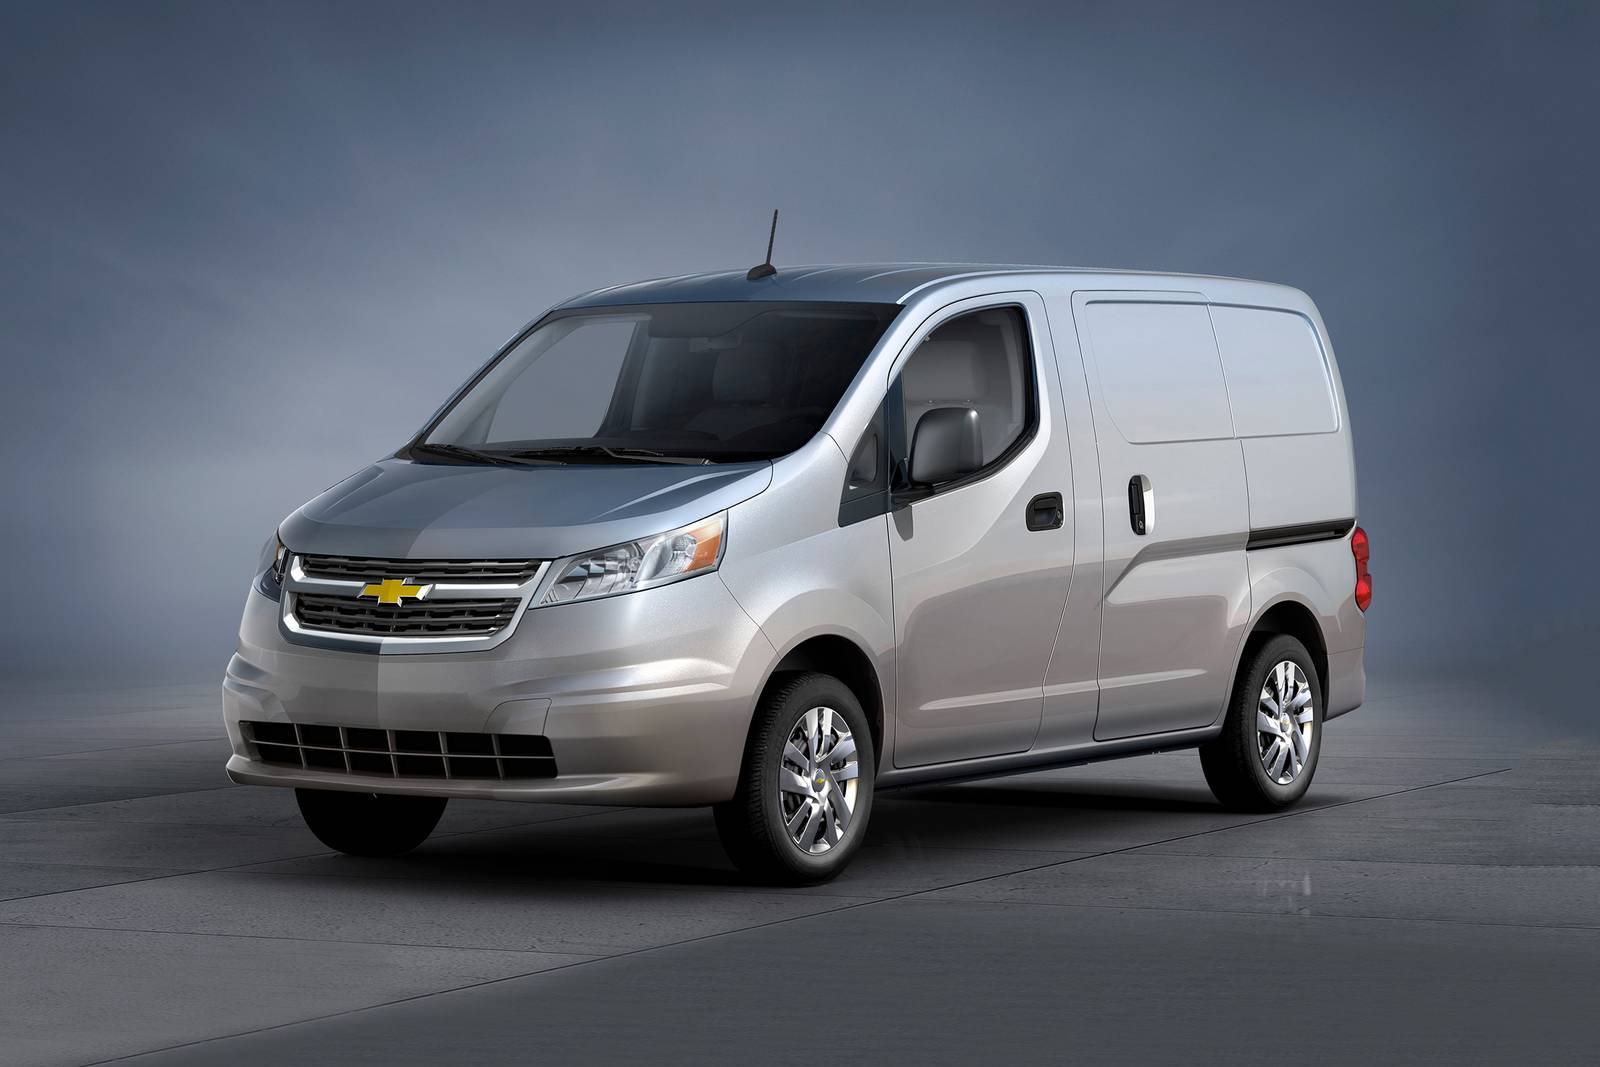 2017 Chevy City Express Review & Ratings | Edmunds